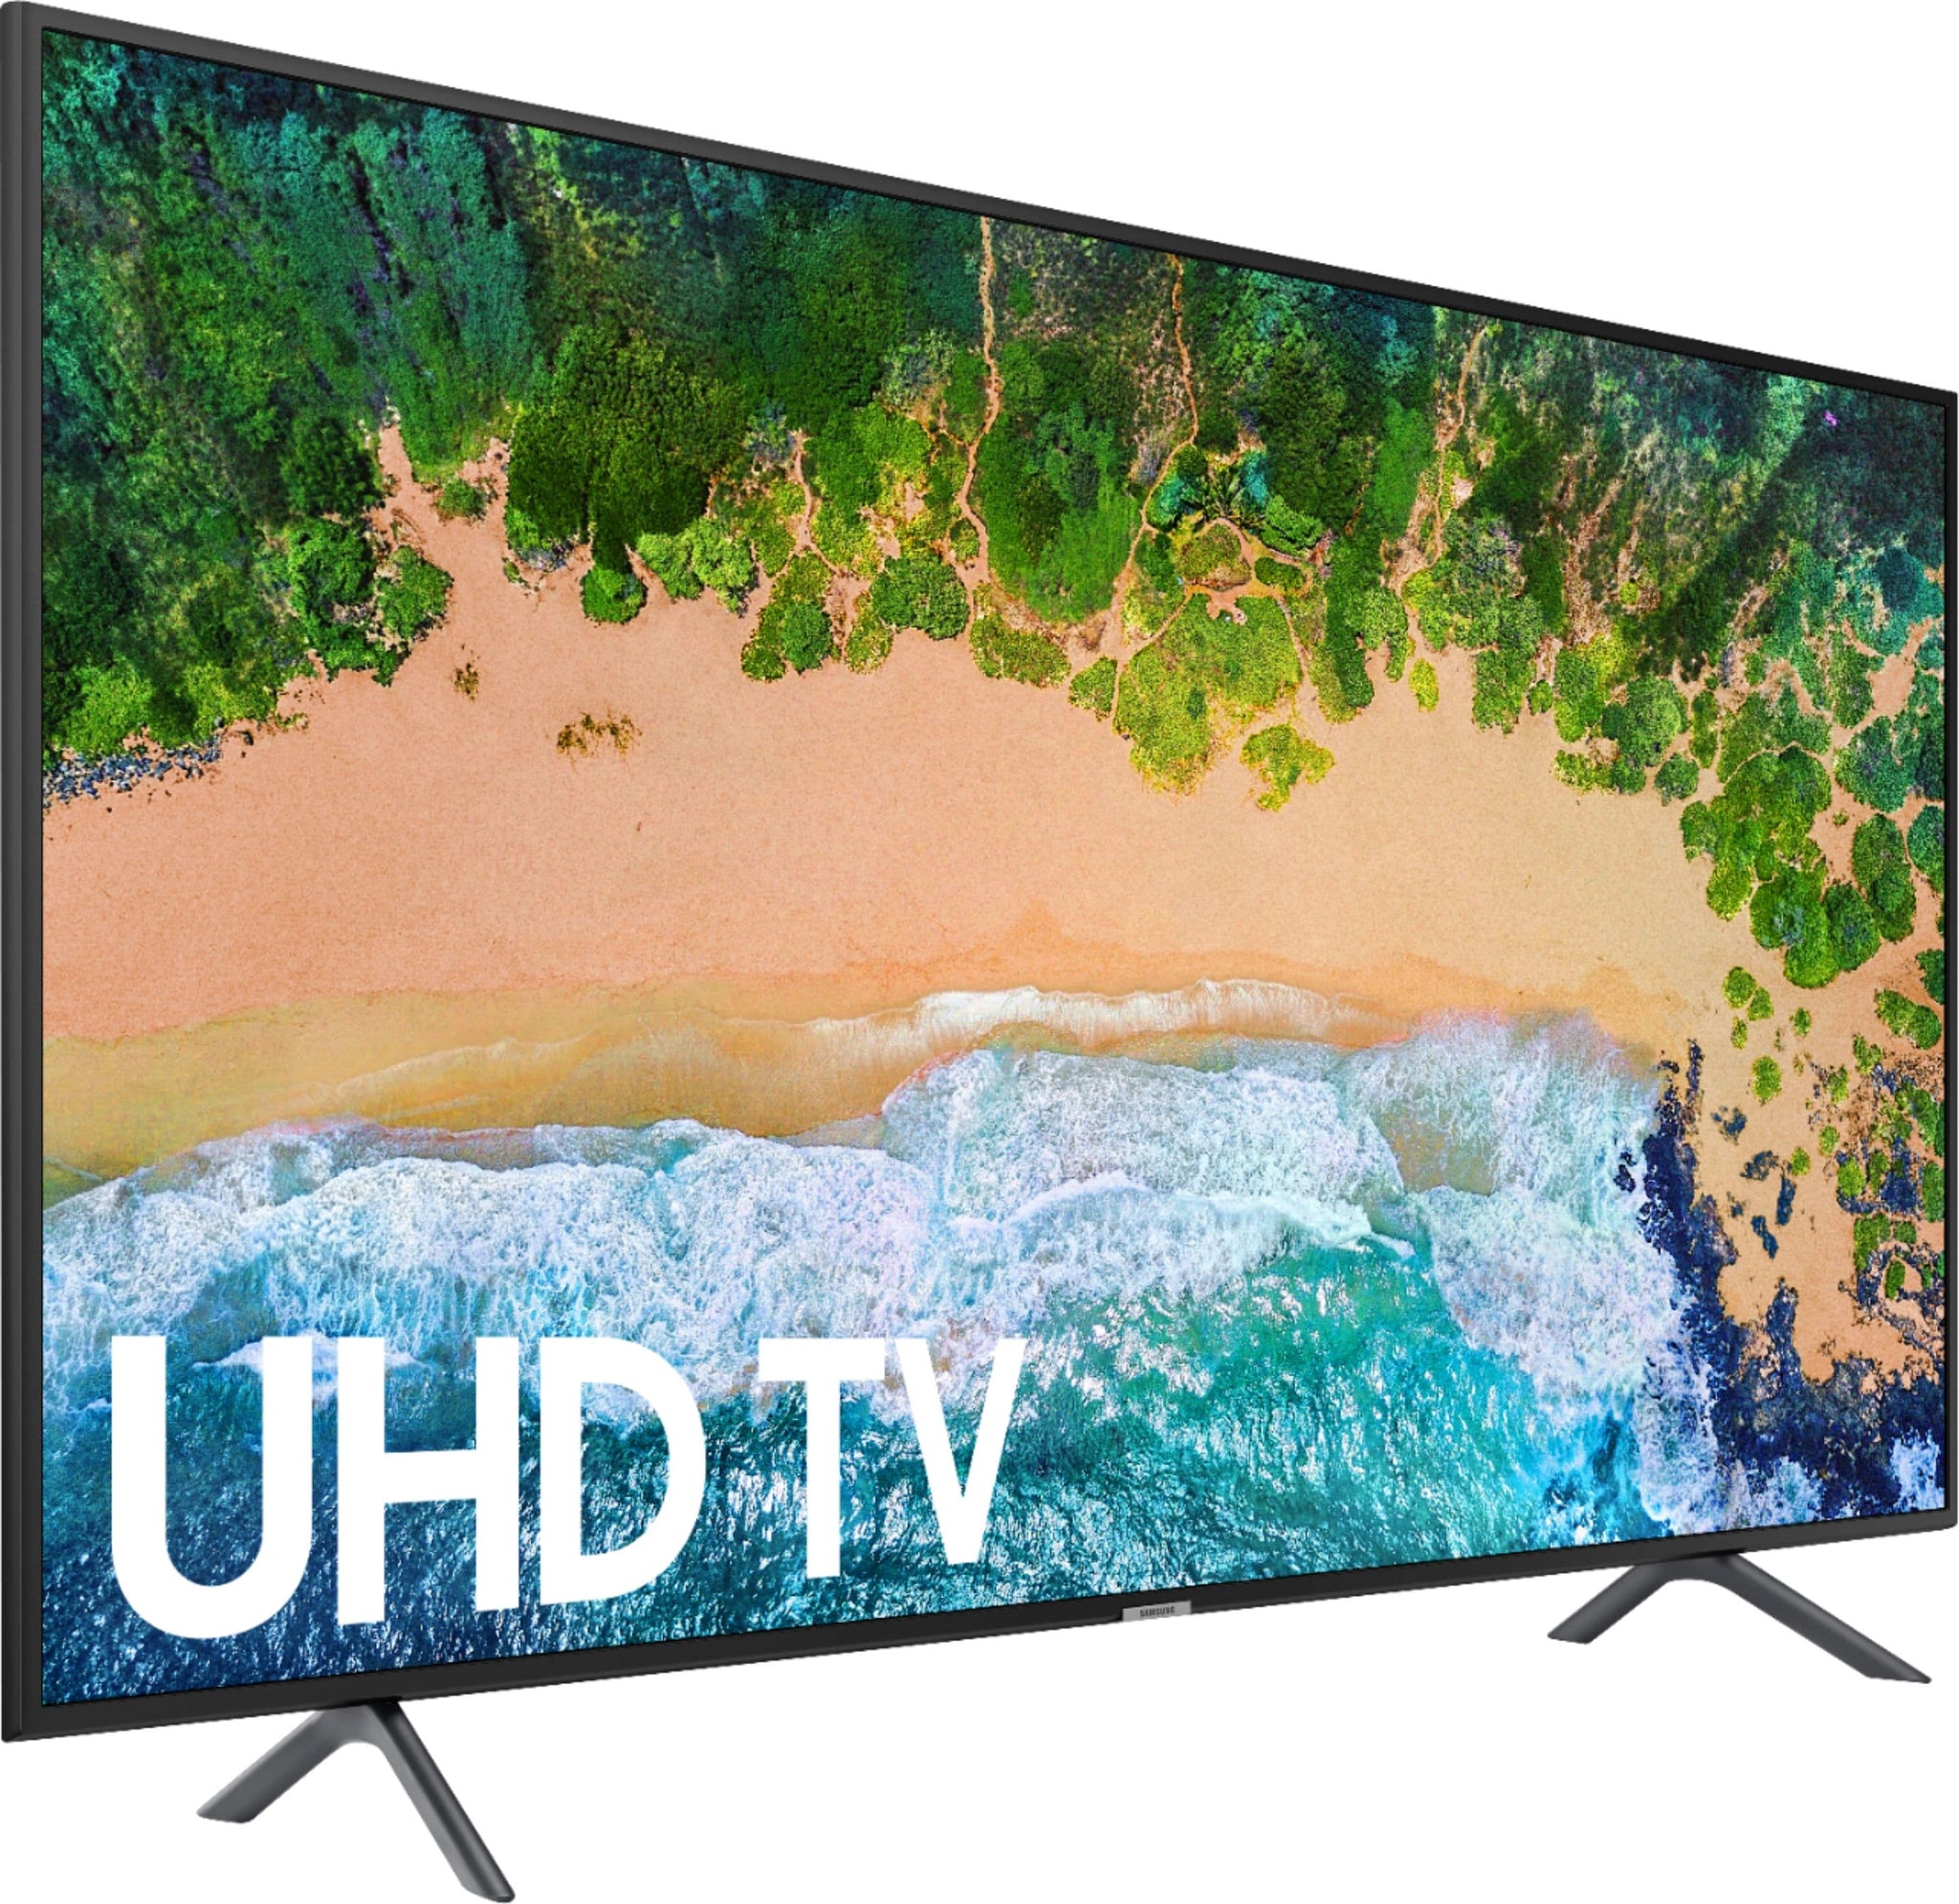 Samsung 75" LED 4K UHD Smart TV 4K(Refurbished) Tv's ONLY for delivery in San Diego and Tijuana